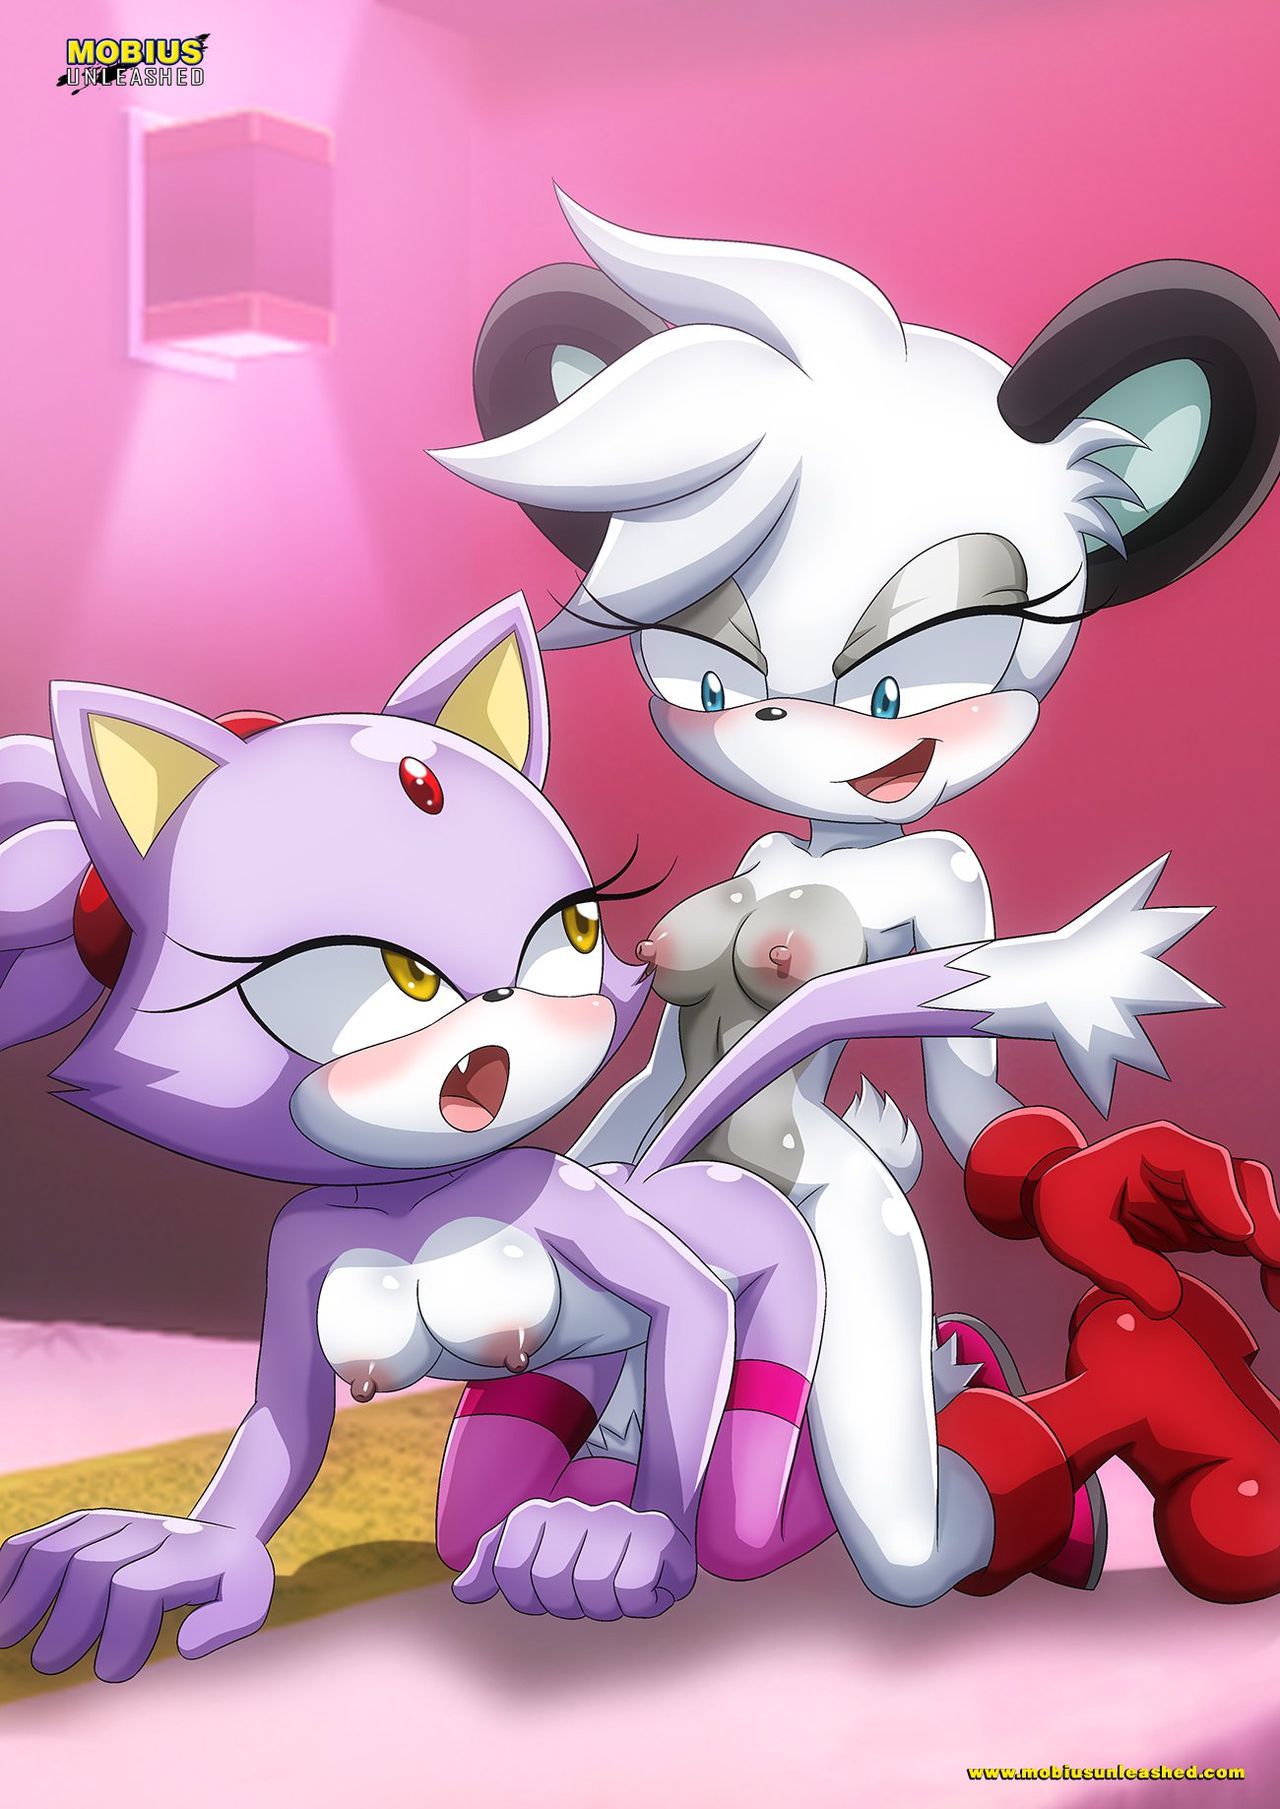 Mobius Unleashed: Blaze the Cat 19